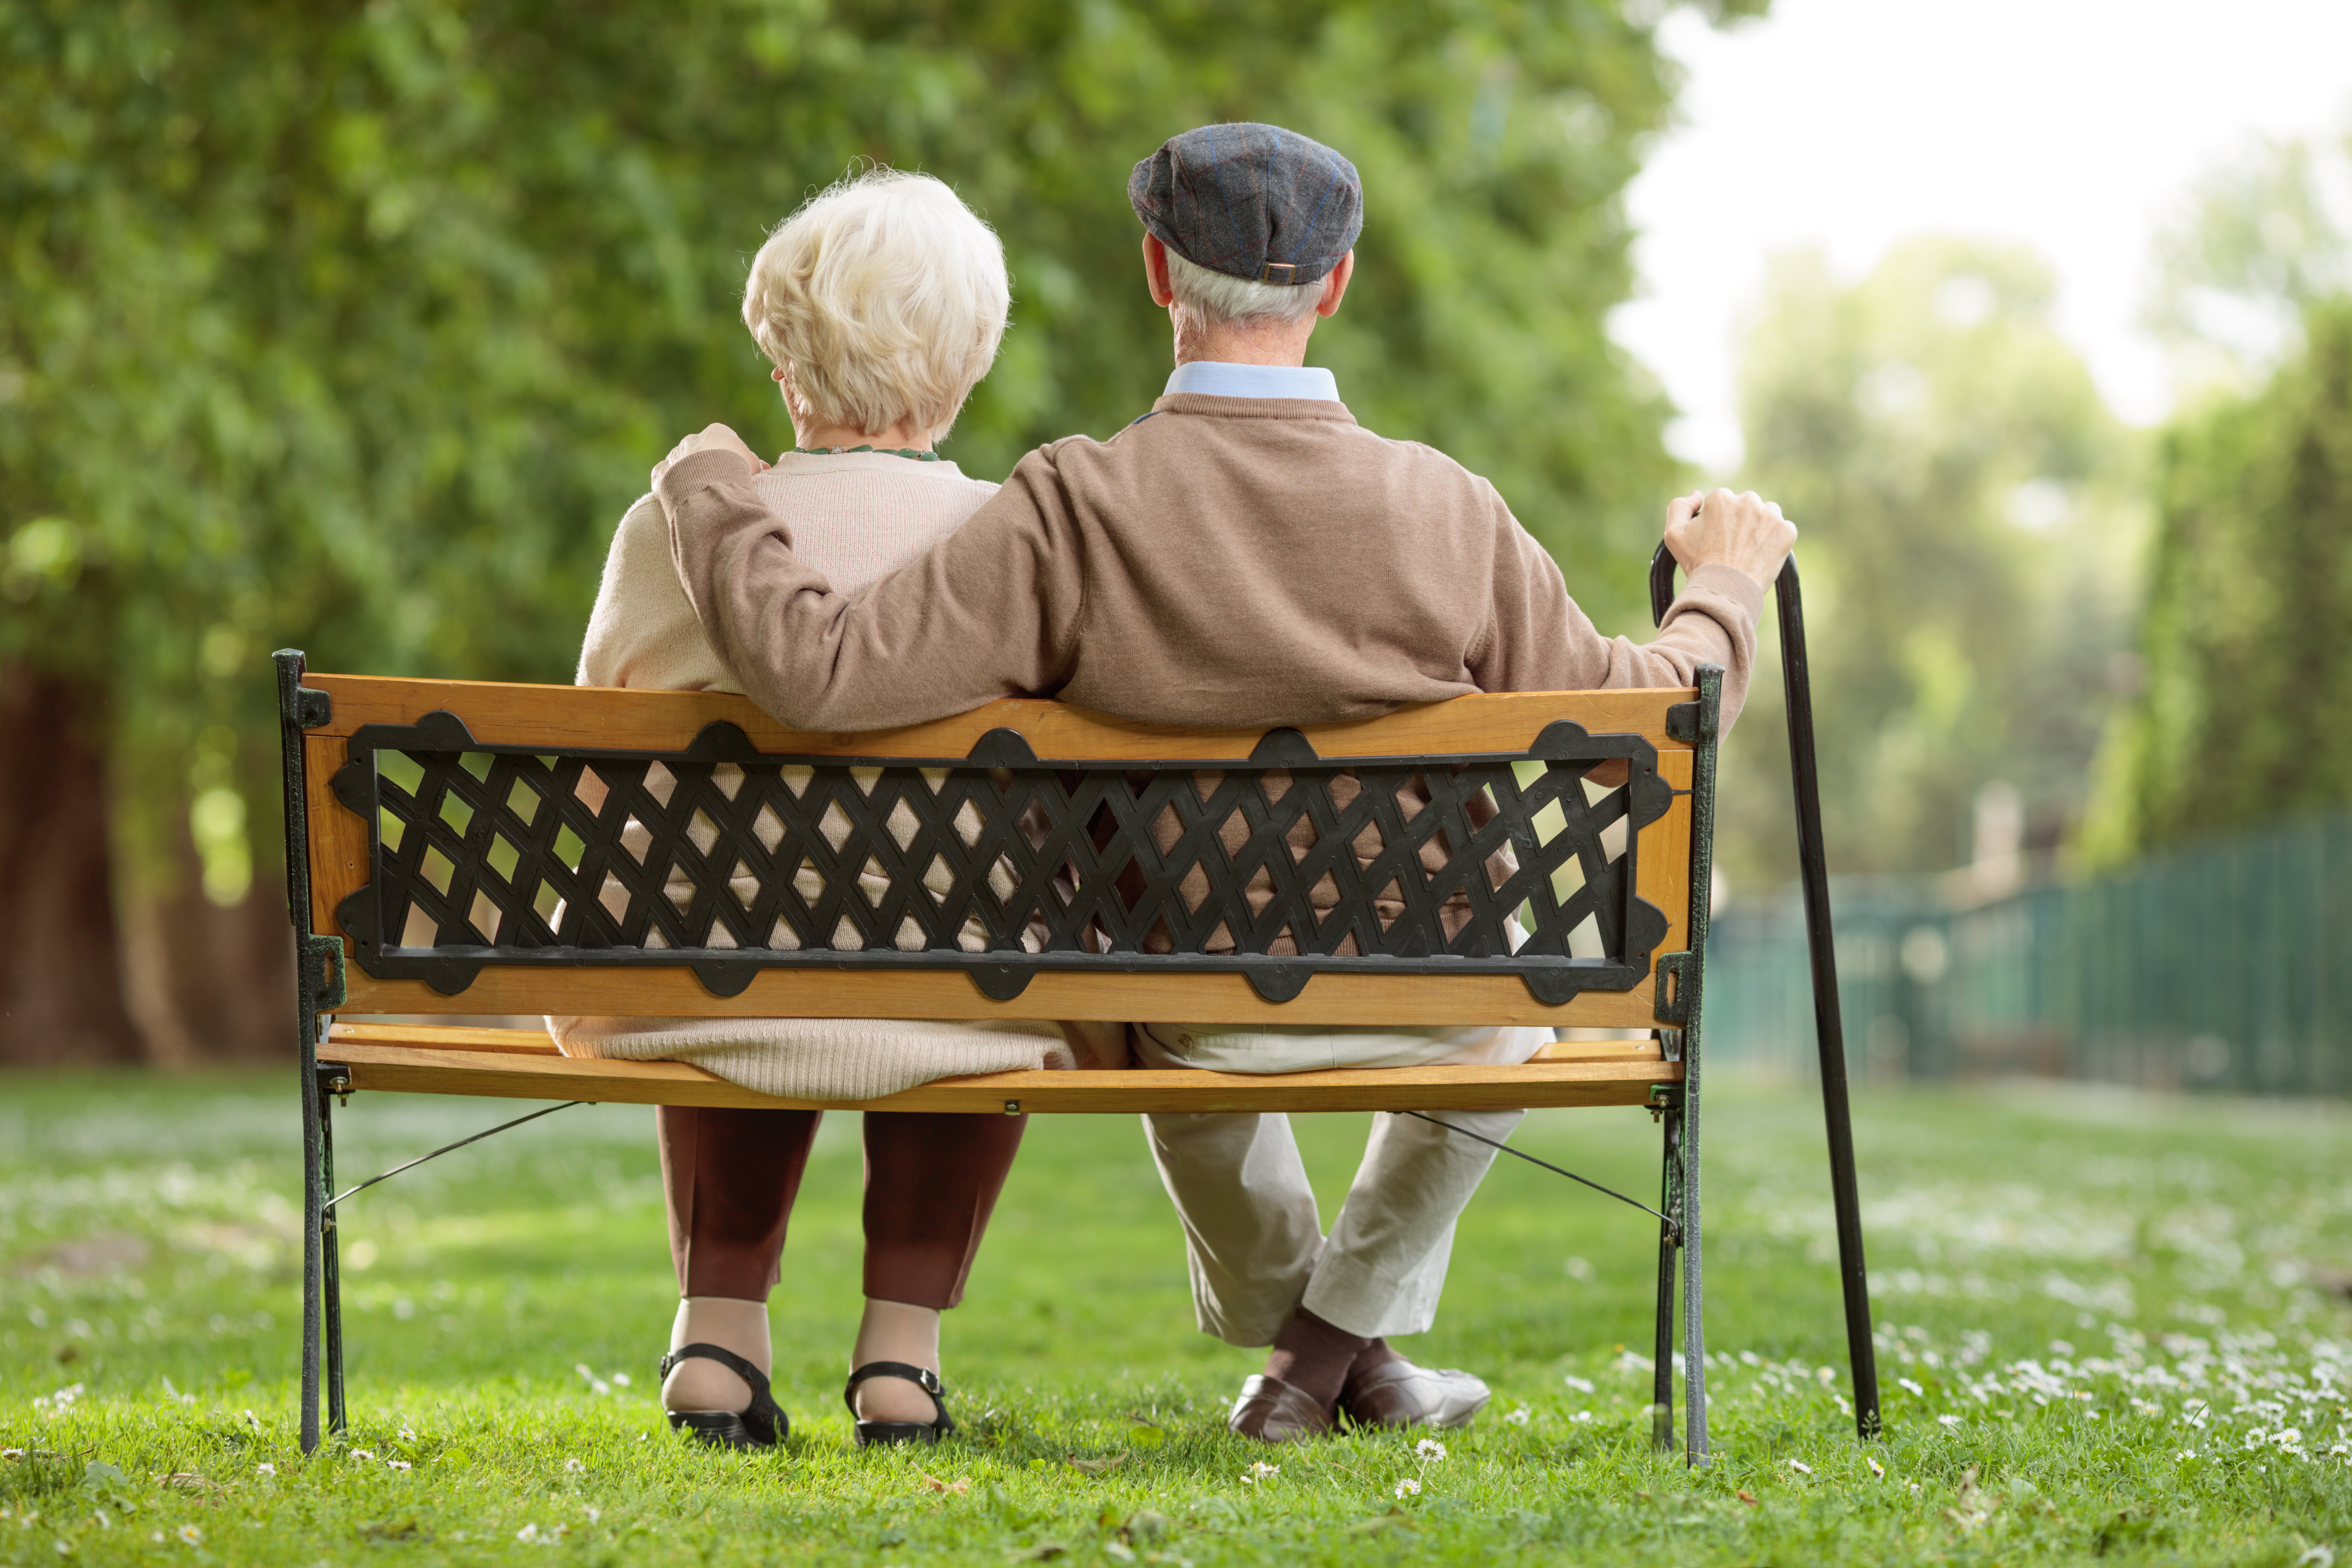 A senior couple sitting in a park | Photo: Shutterstock.com